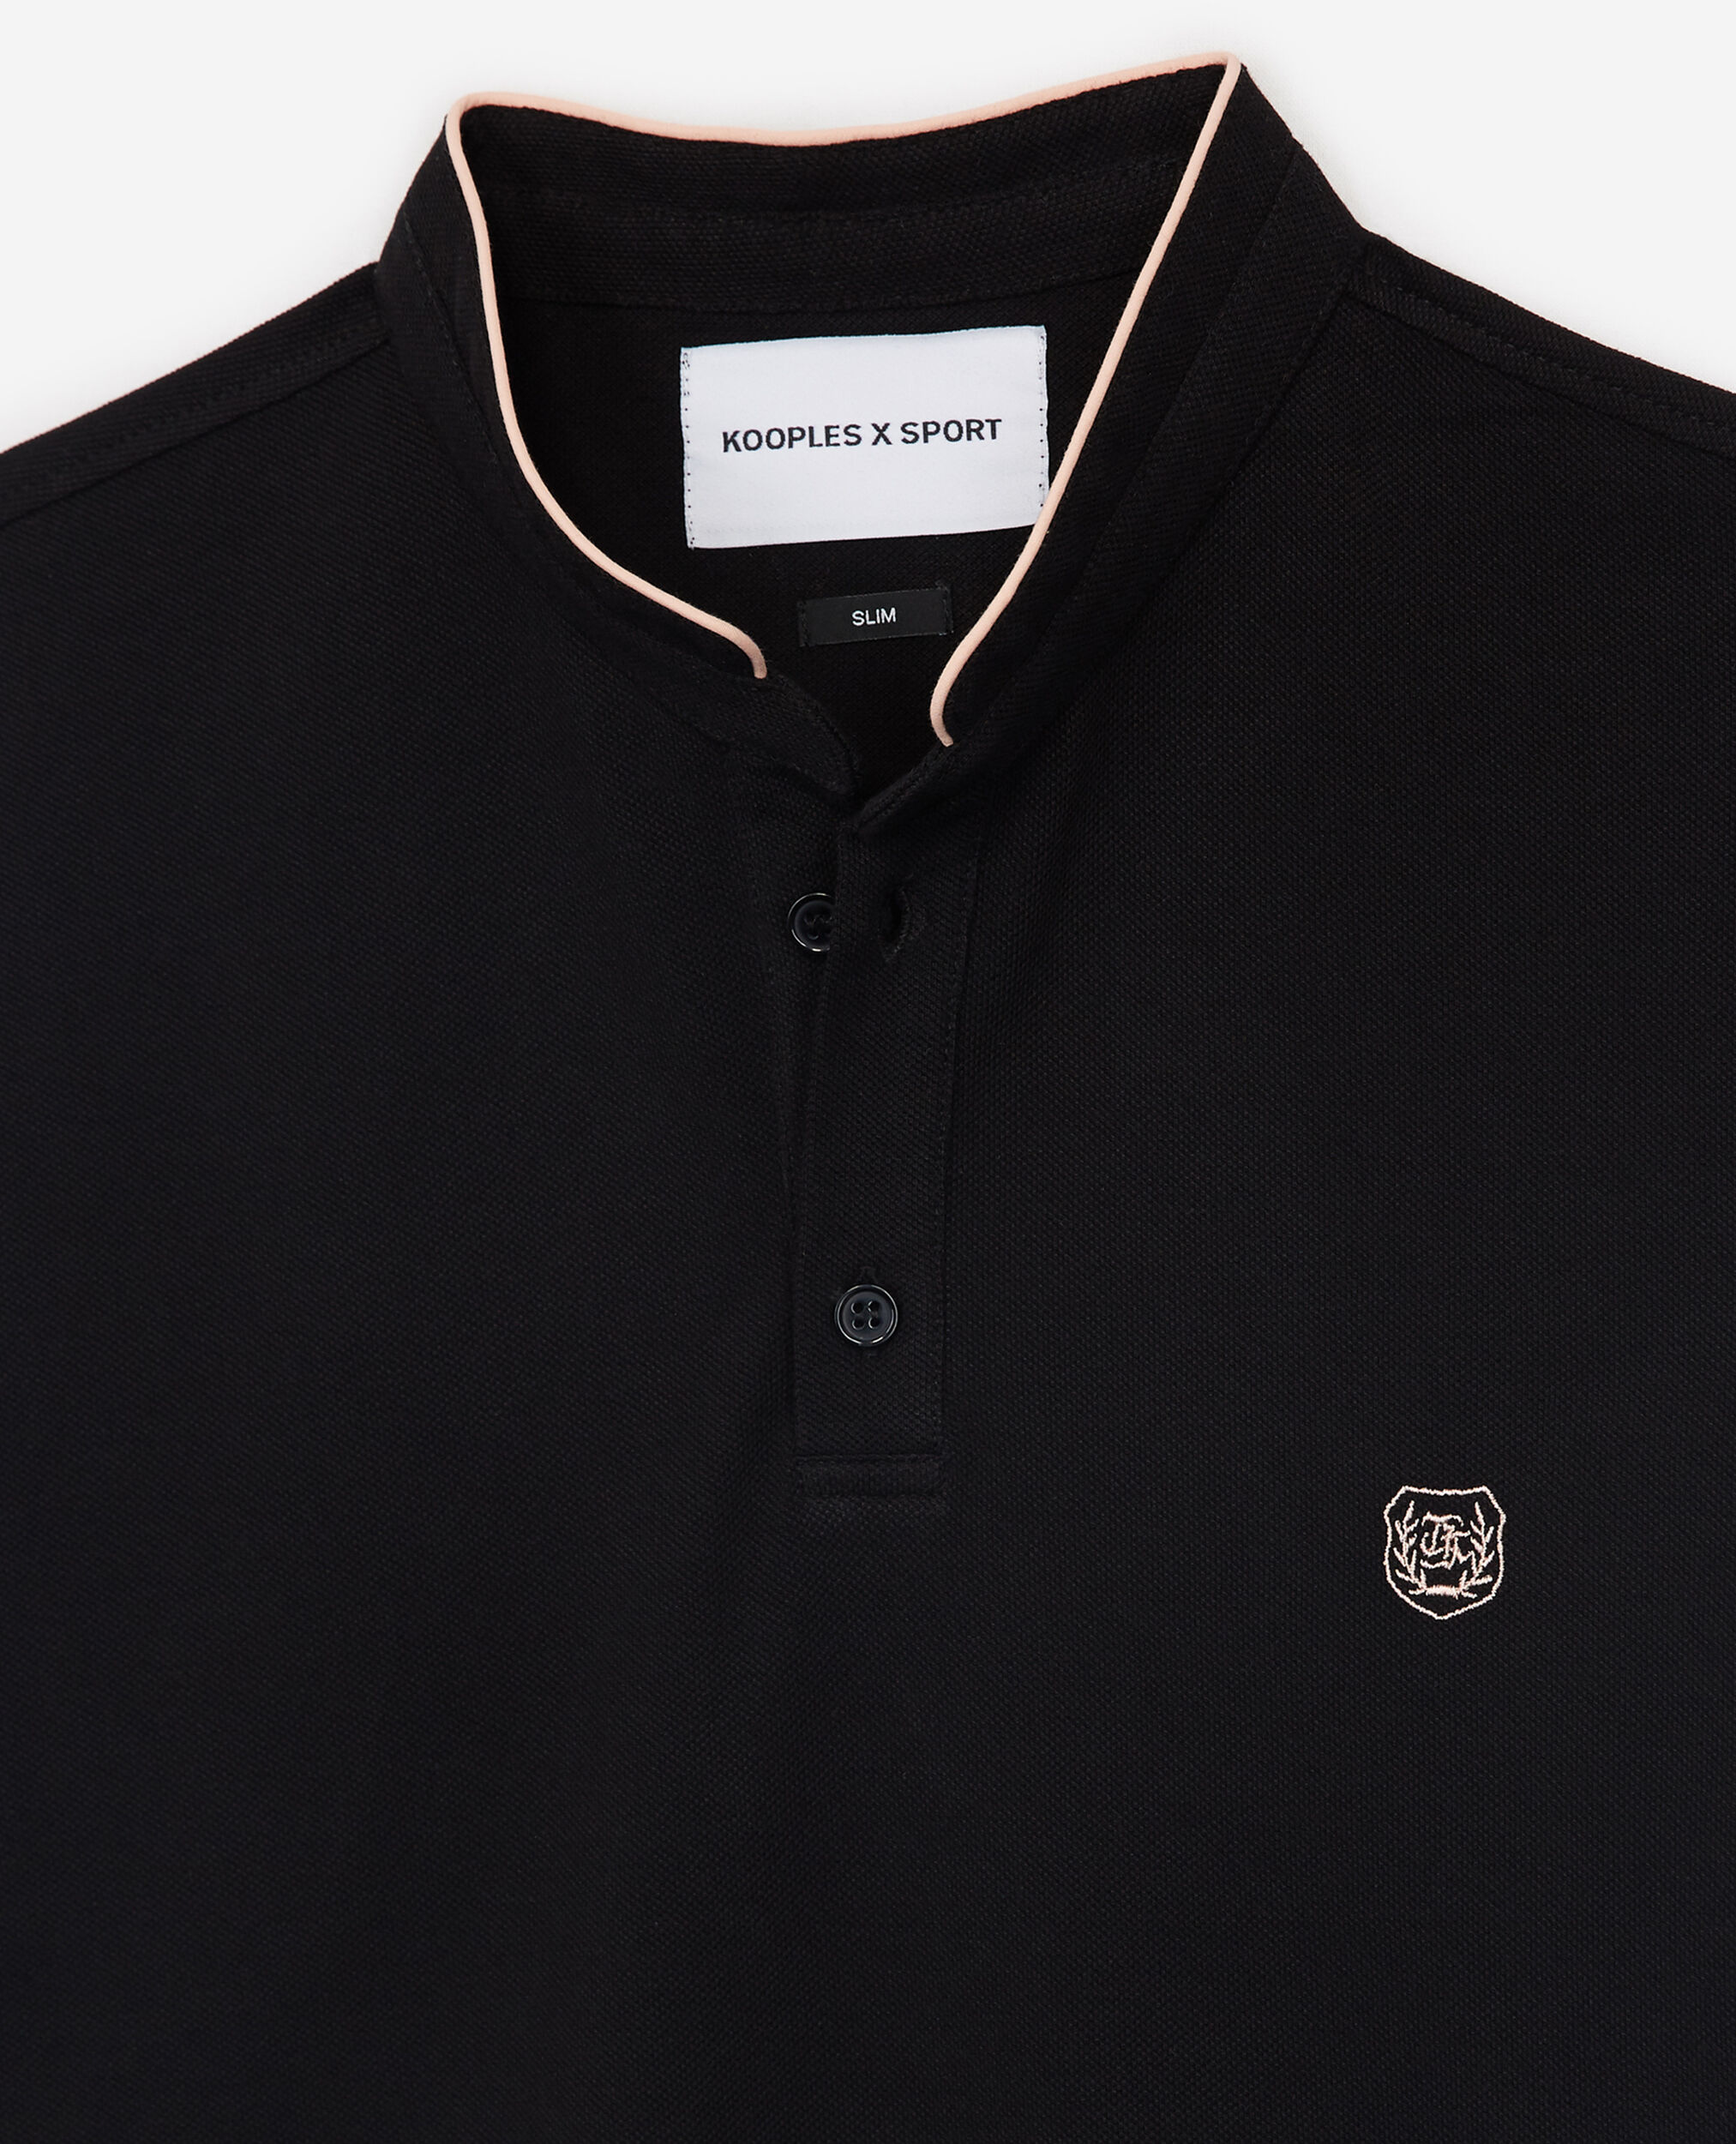 Black polo shirt, BLACK / PINK CORAIL, hi-res image number null